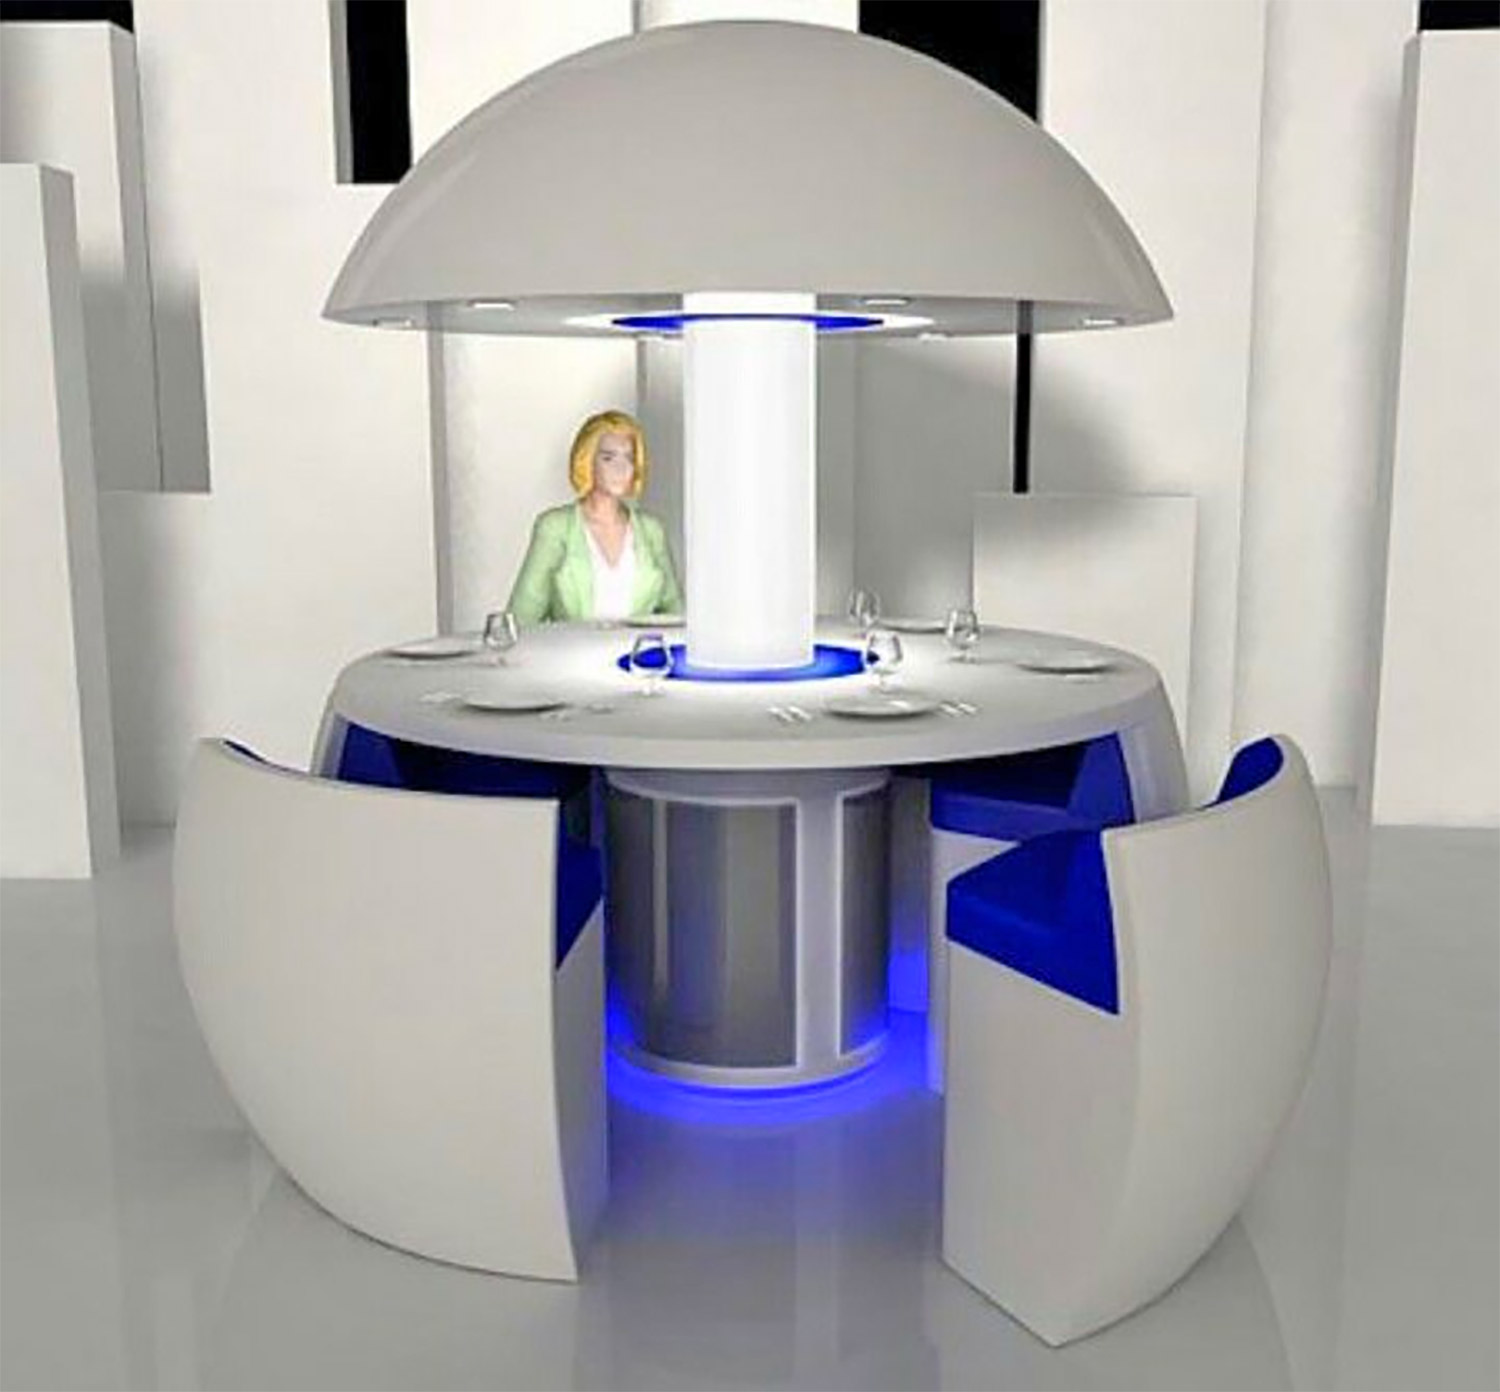 Kure Futuristic Dining Table Turns Into an Egg When Not In Use